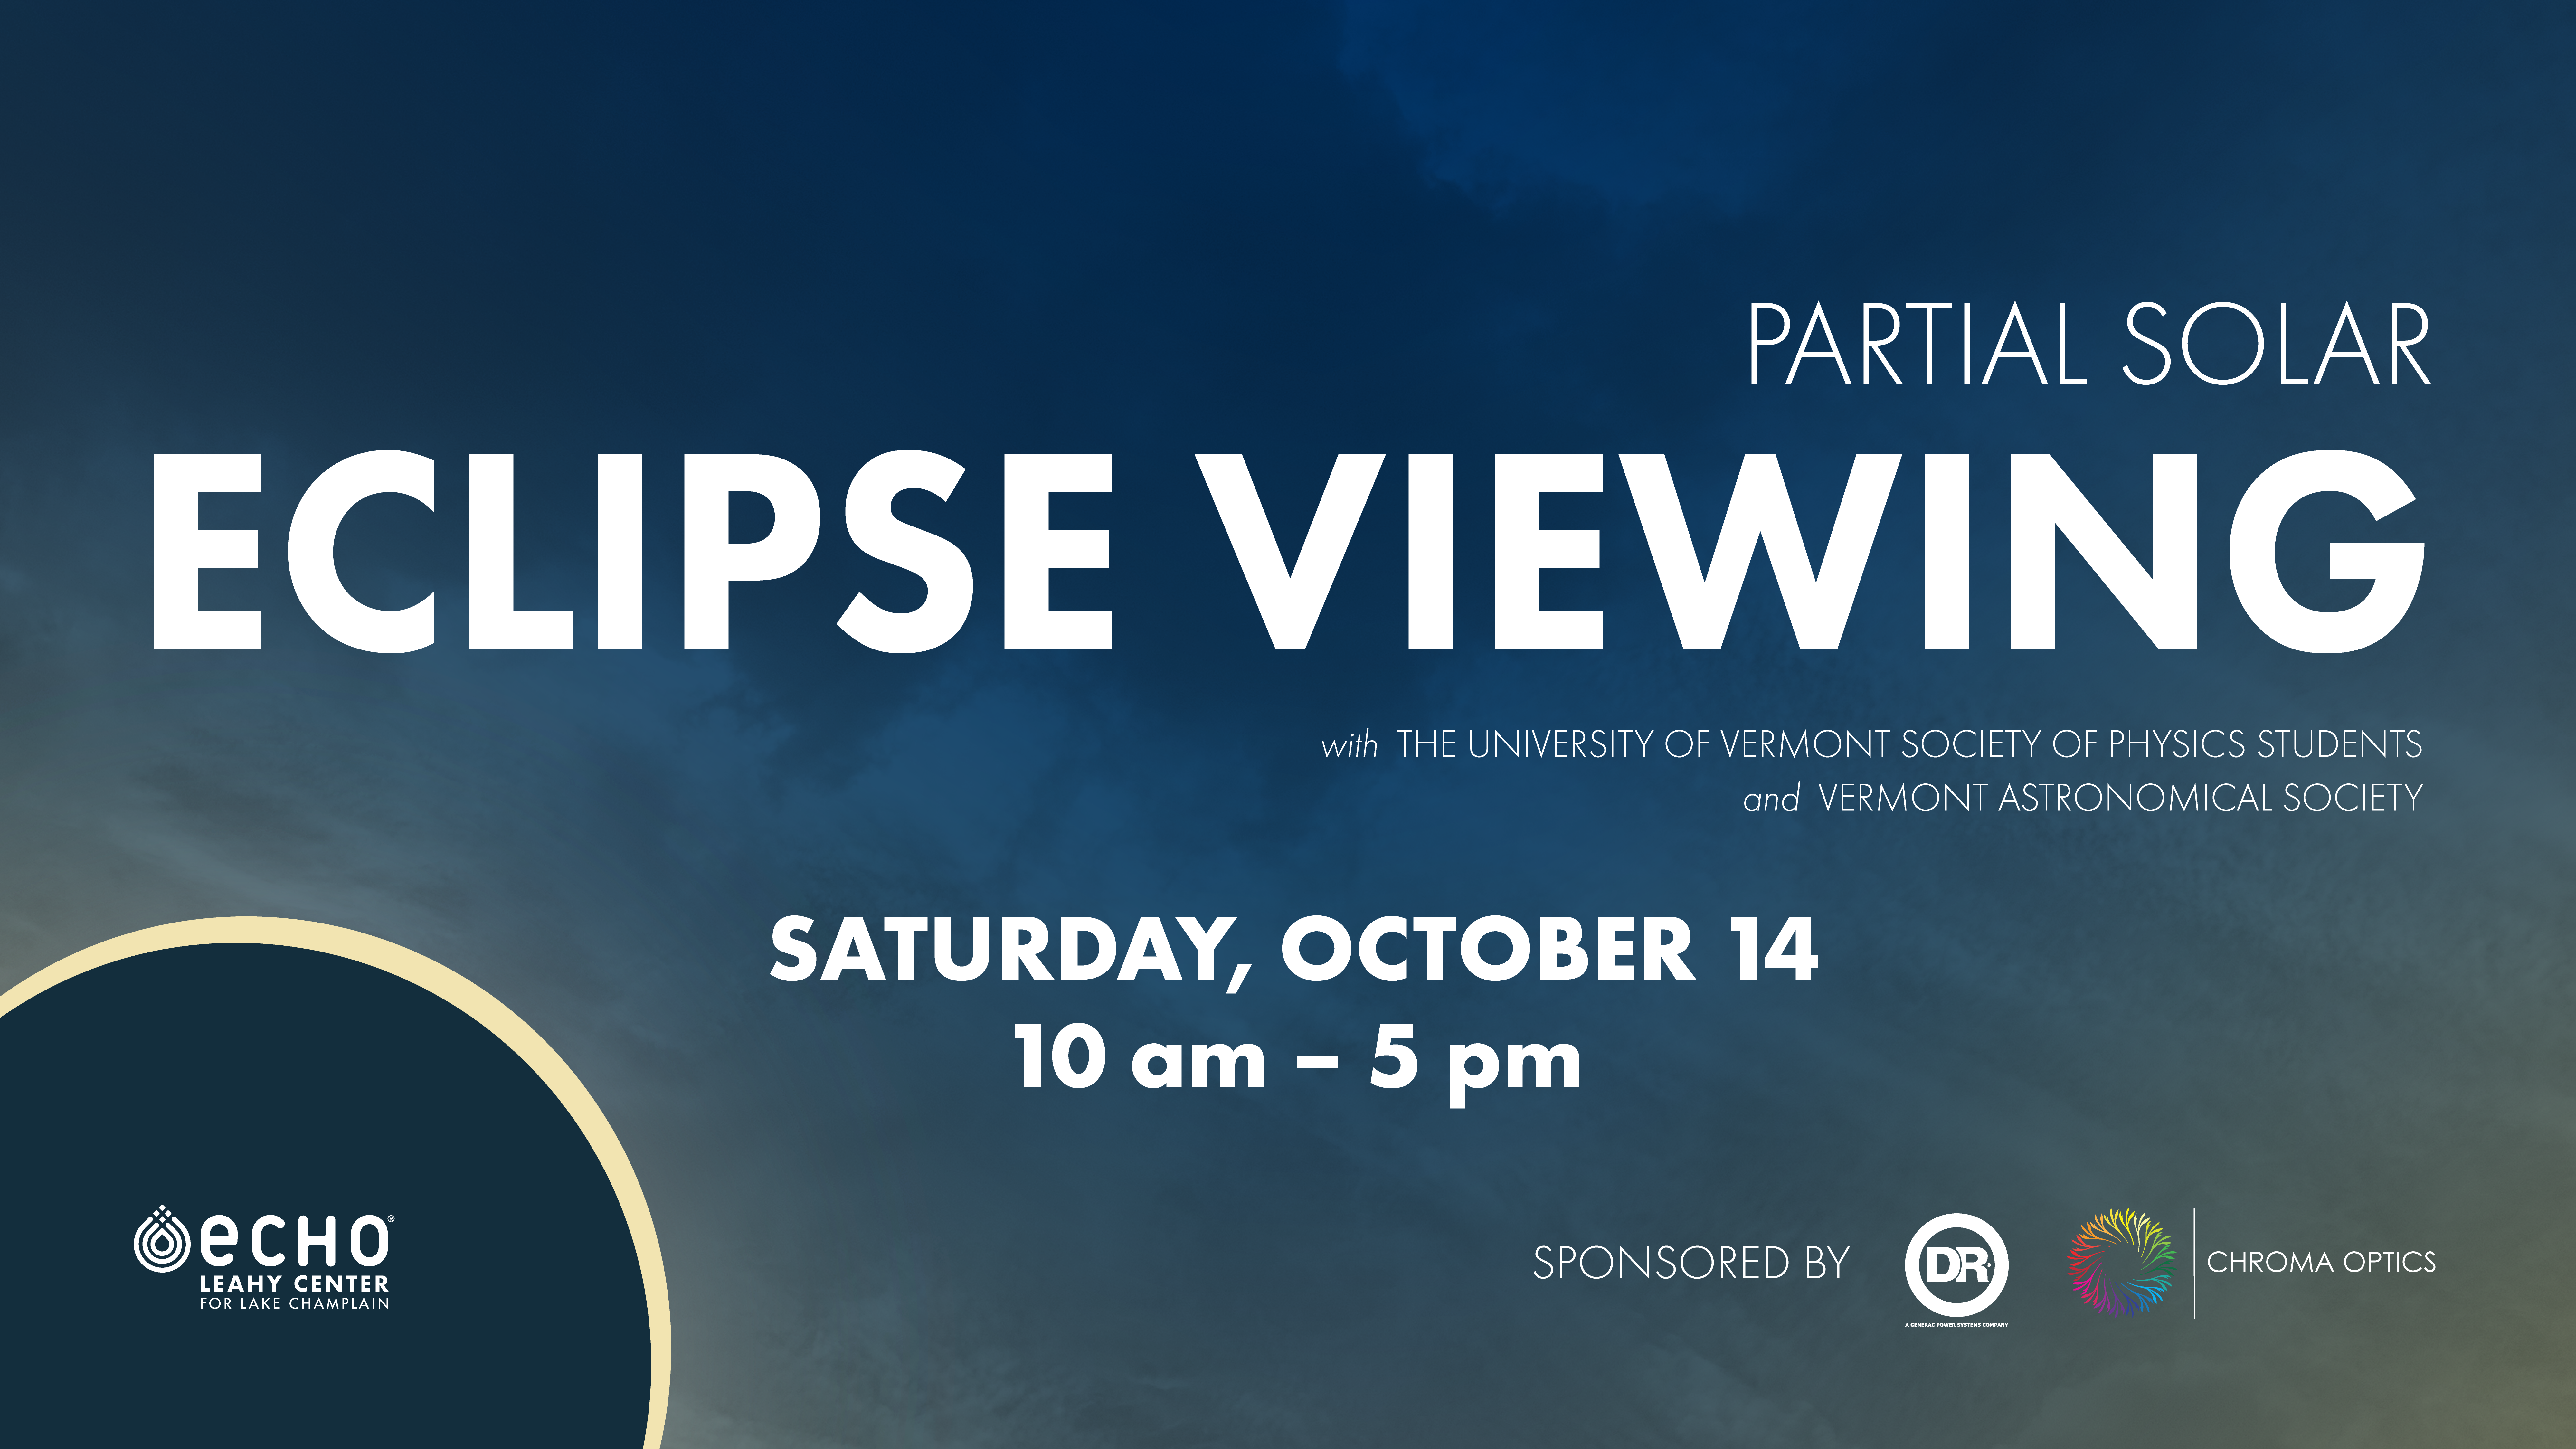 Graphic of the night sky with title "Partial Solar Eclipse Viewing with The University of Vermont Society of Physics Students and Vermont Astronomical Society, Saturday, October 14 10 am - 5 pm"